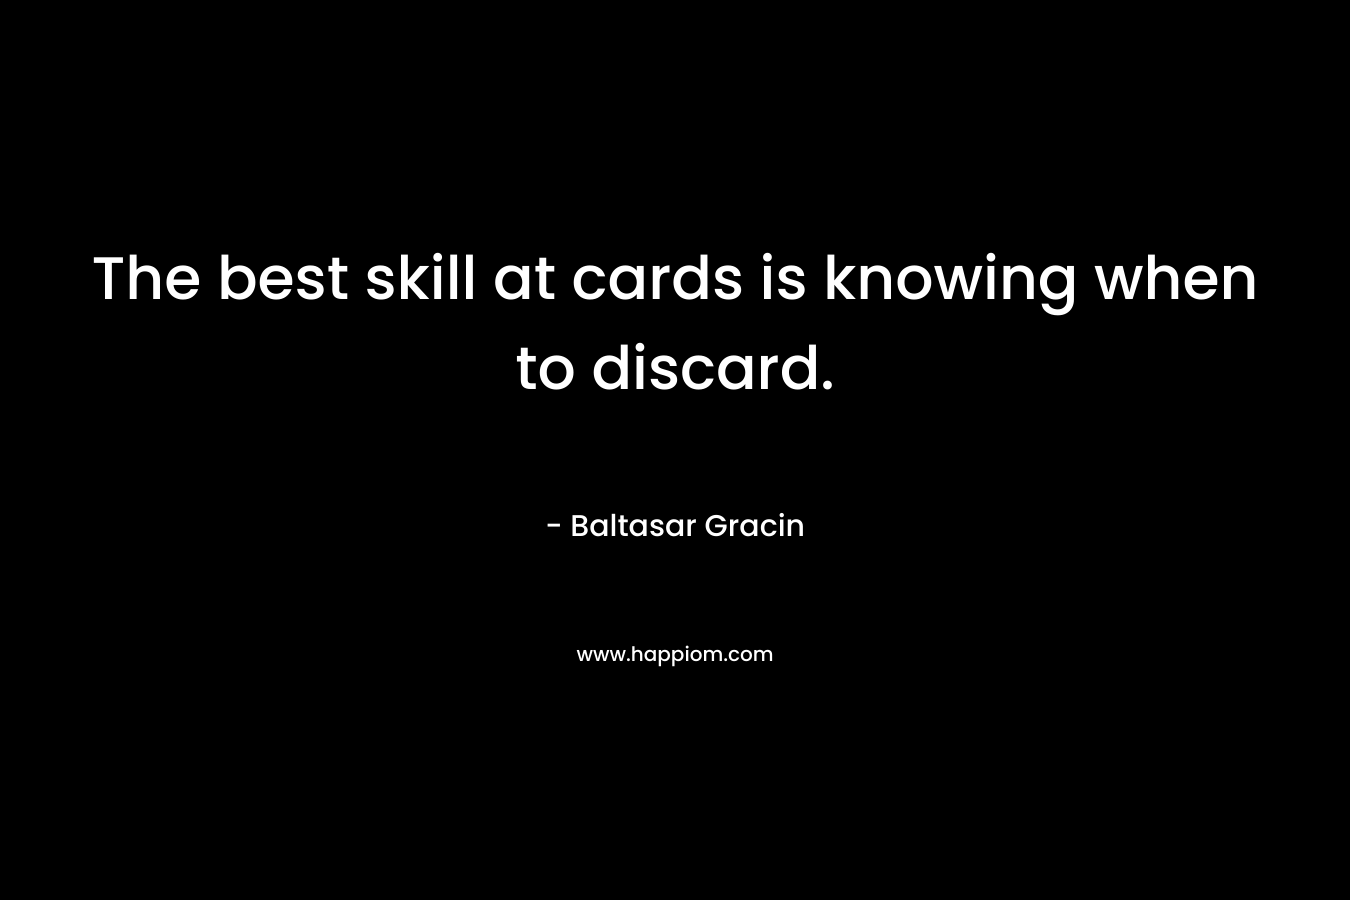 The best skill at cards is knowing when to discard. – Baltasar Gracin